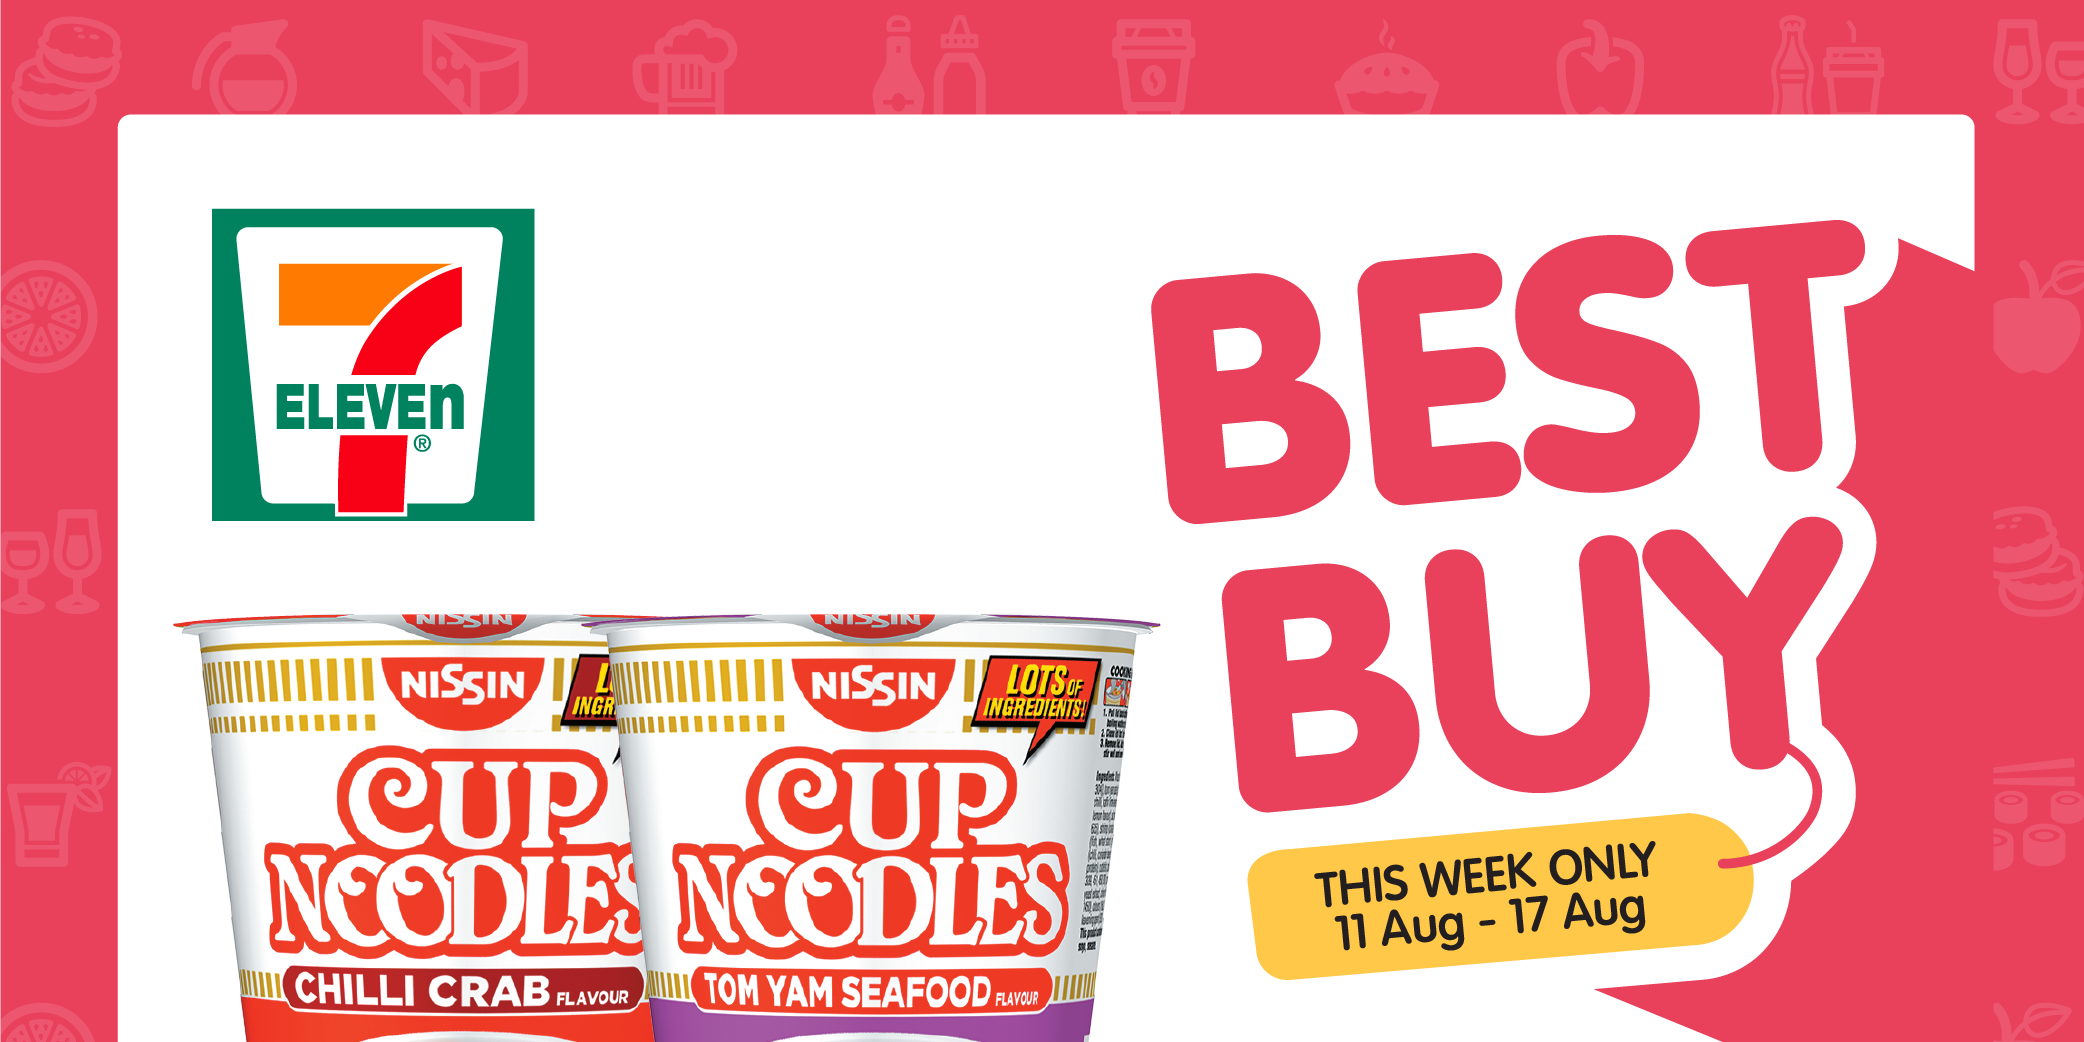 7-Eleven Weekly BEST BUY – Nissin Cup Noodles (11 Aug – 18 Aug)